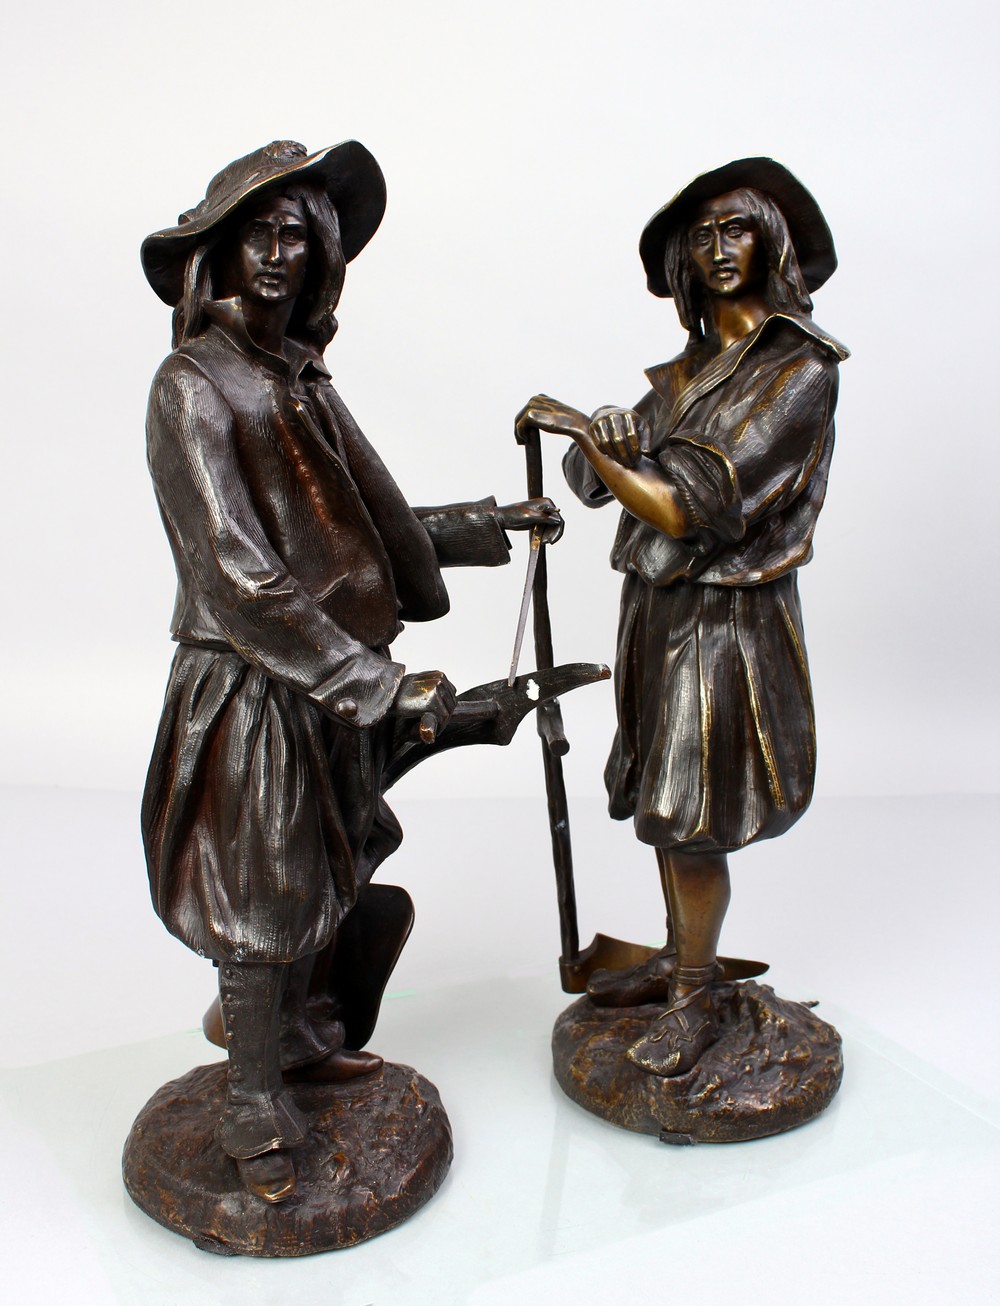 EMILE VICTOR BLAVIER (19TH CENTURY) FRENCH A RARE PAIR OF BRONZE FIELD WORKERS, one carrying a